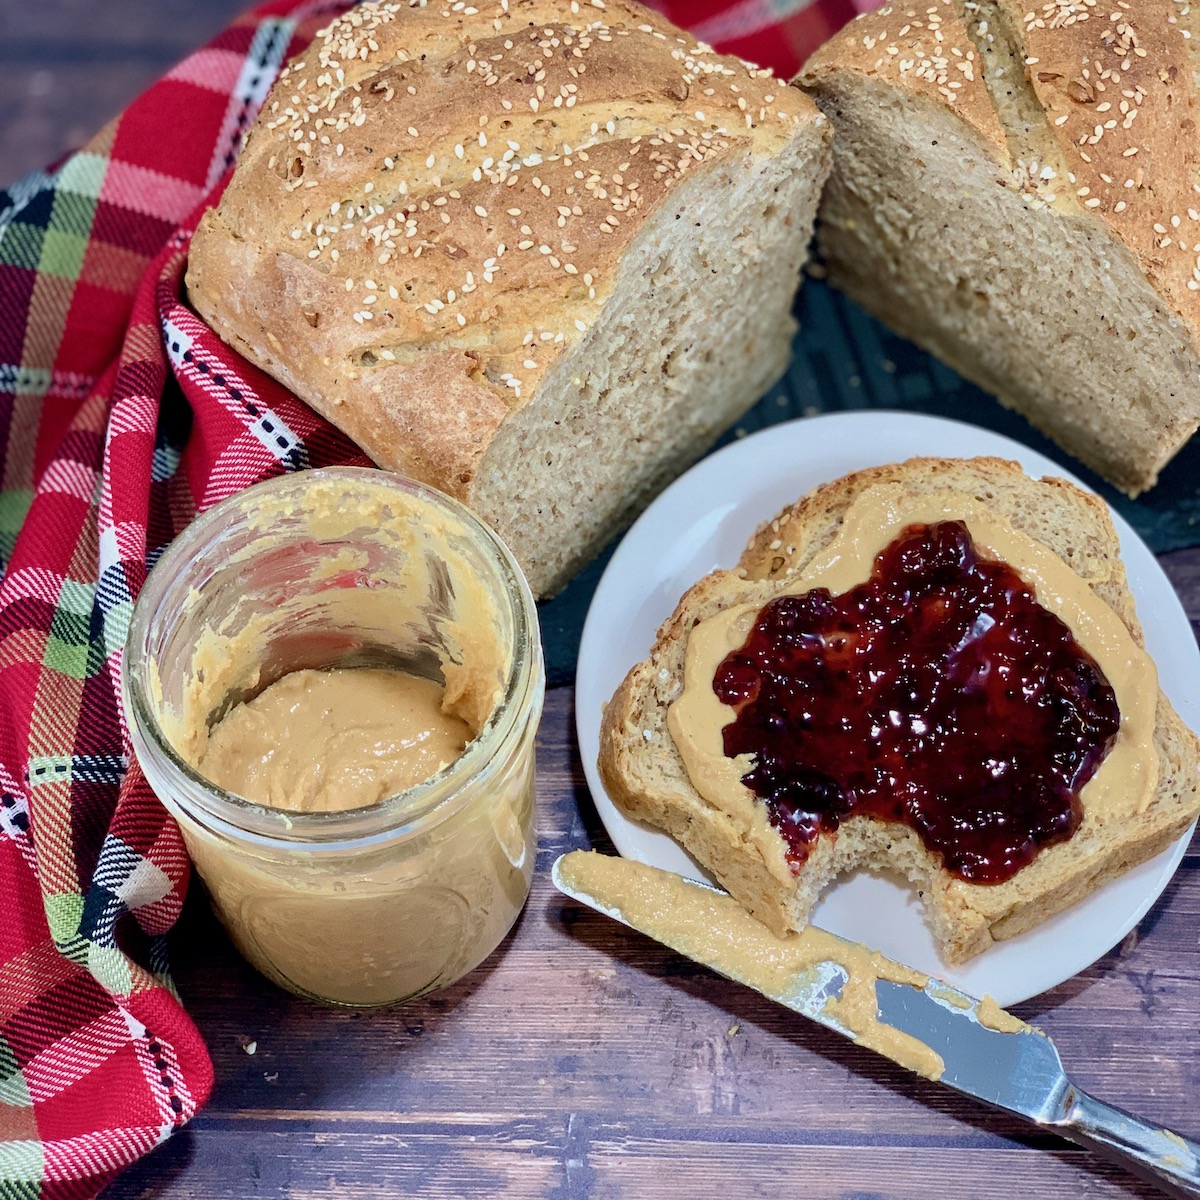 Open face peanut butter & jelly sandwich with bite and bread & jar